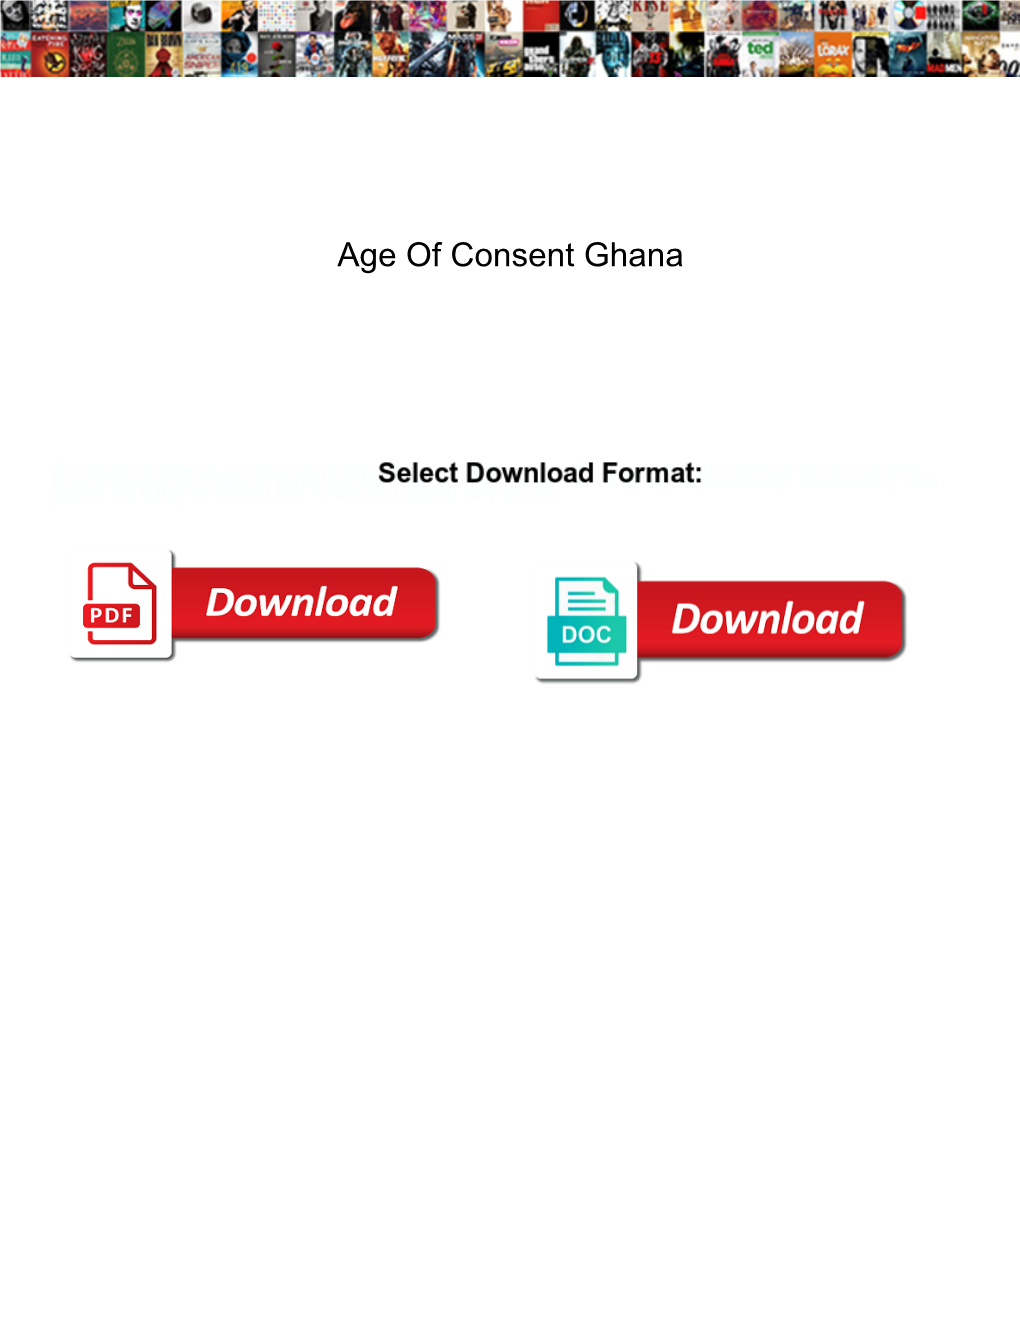 Age of Consent Ghana